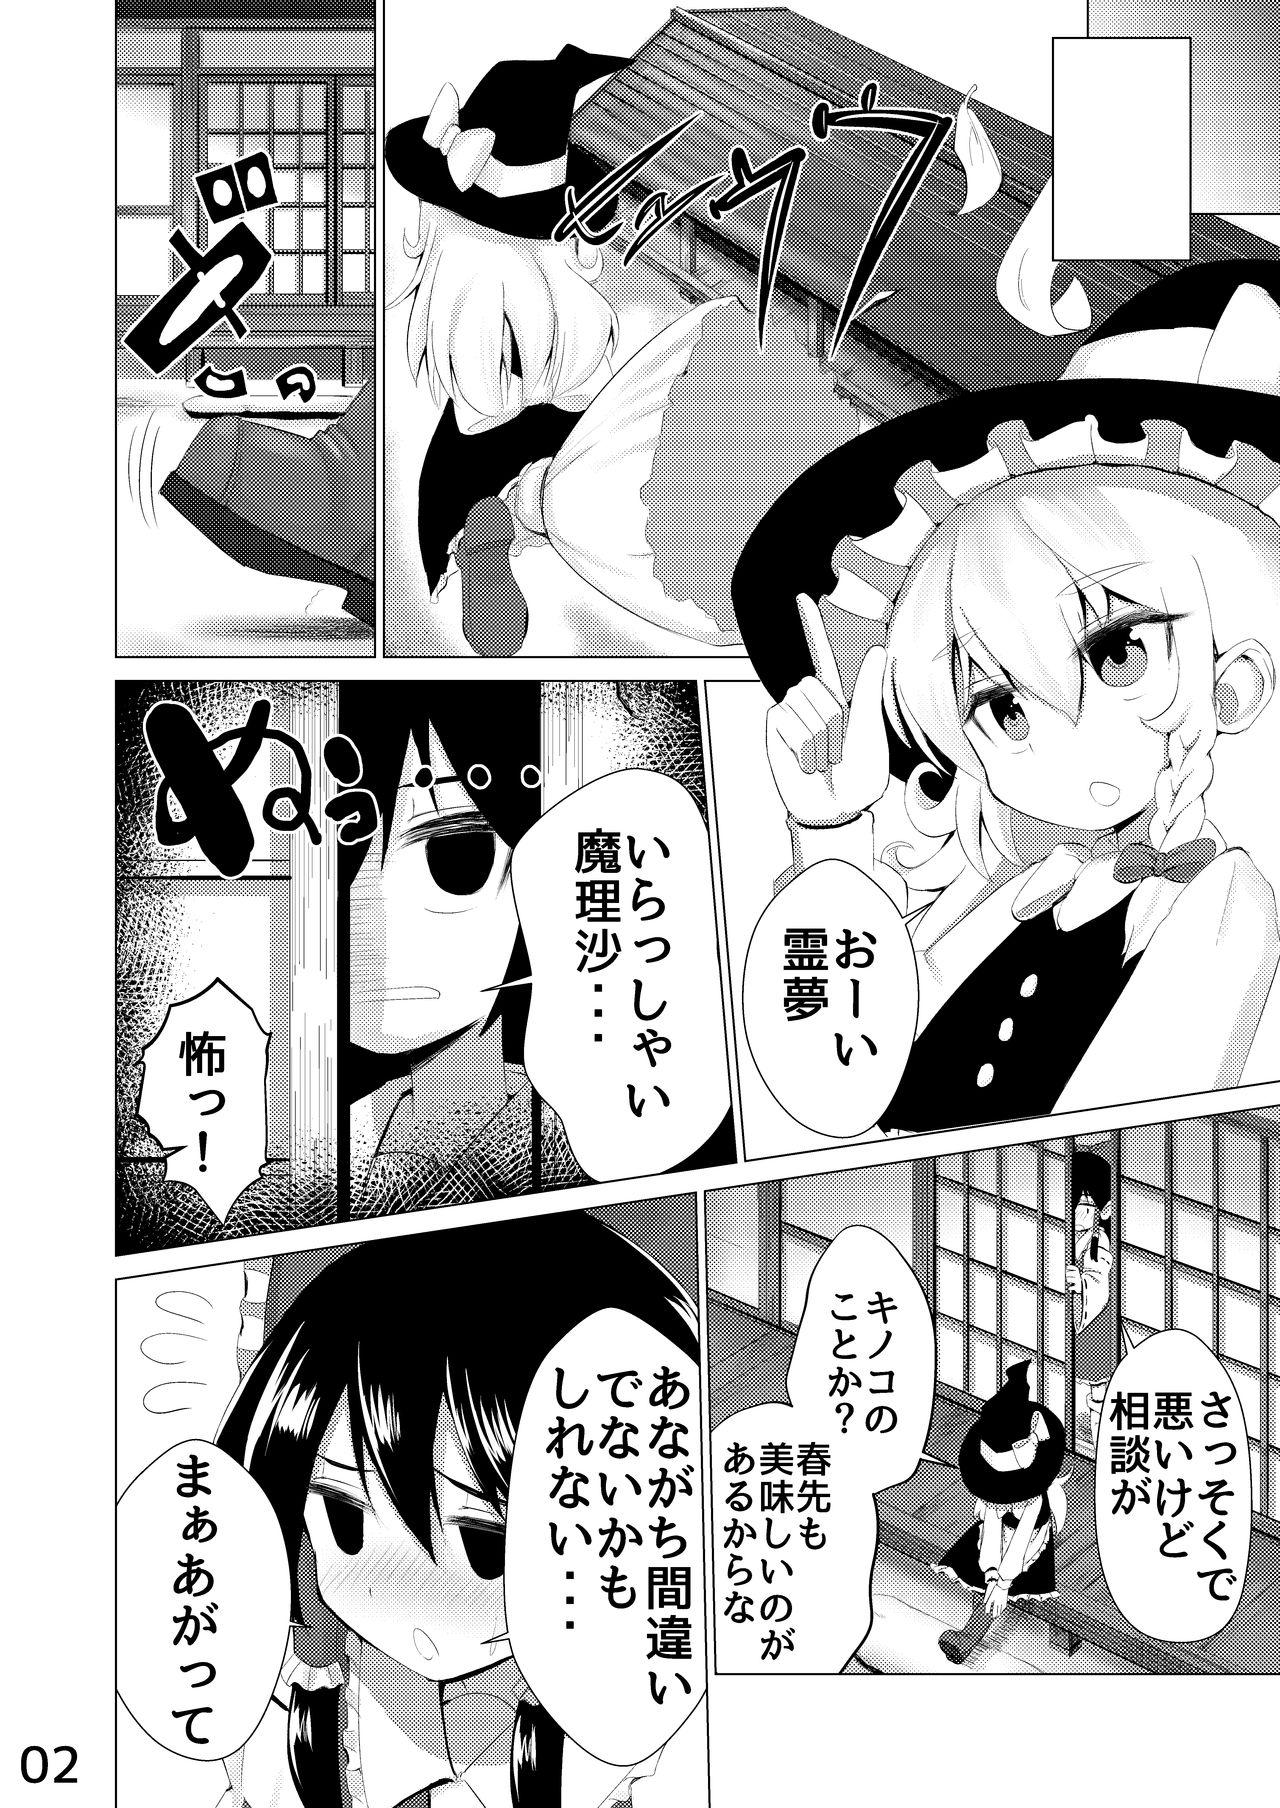 Oral Sex [NO相撲KING (吸斬) 生えた (Touhou Project) [Digital] - Touhou project Teenporn - Page 3